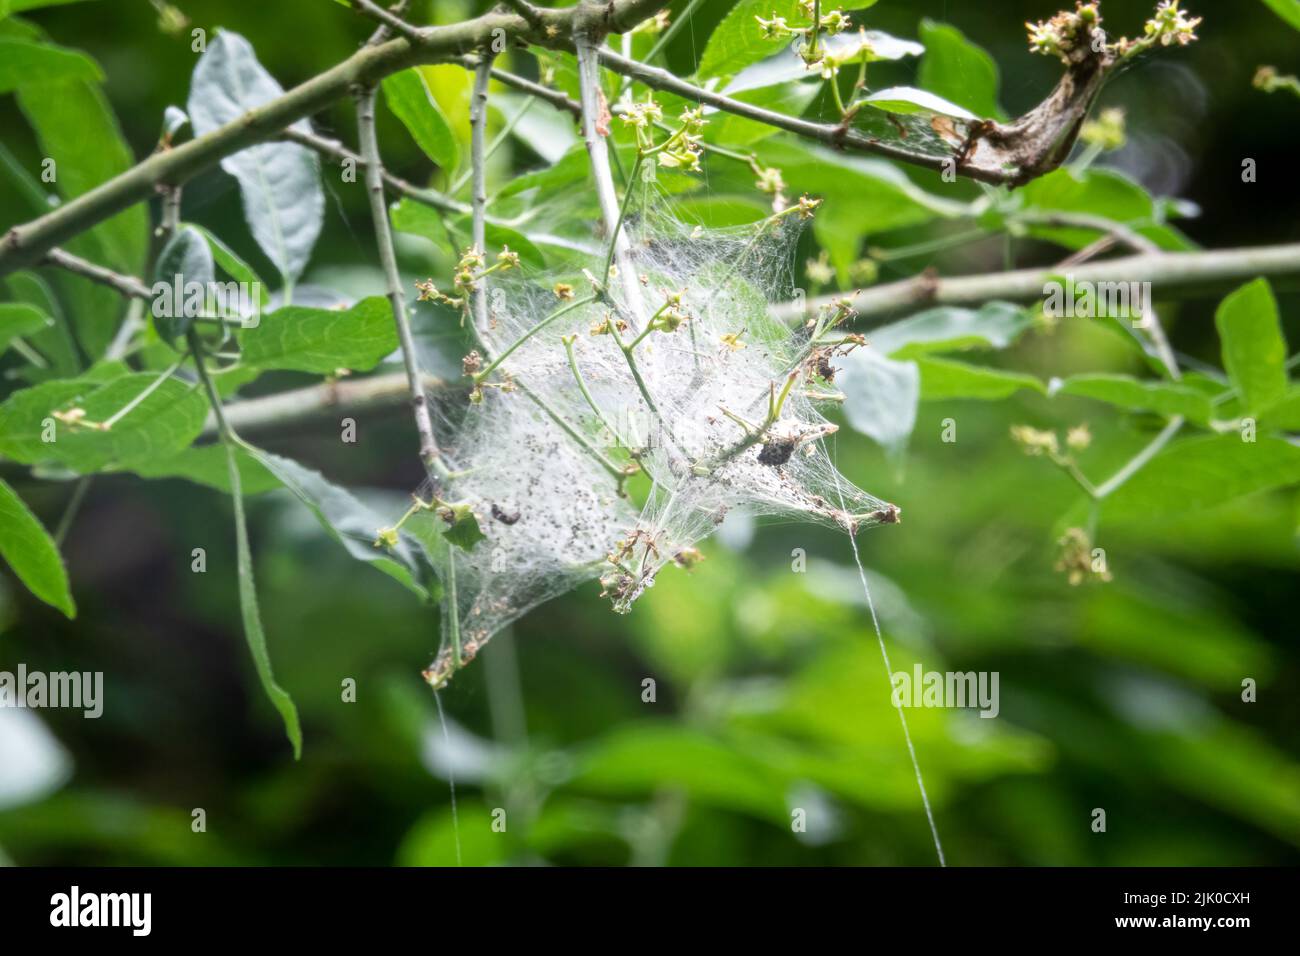 detailed close up of an Emine spindle moth (Yponomeuta cagnagella) web tent Stock Photo